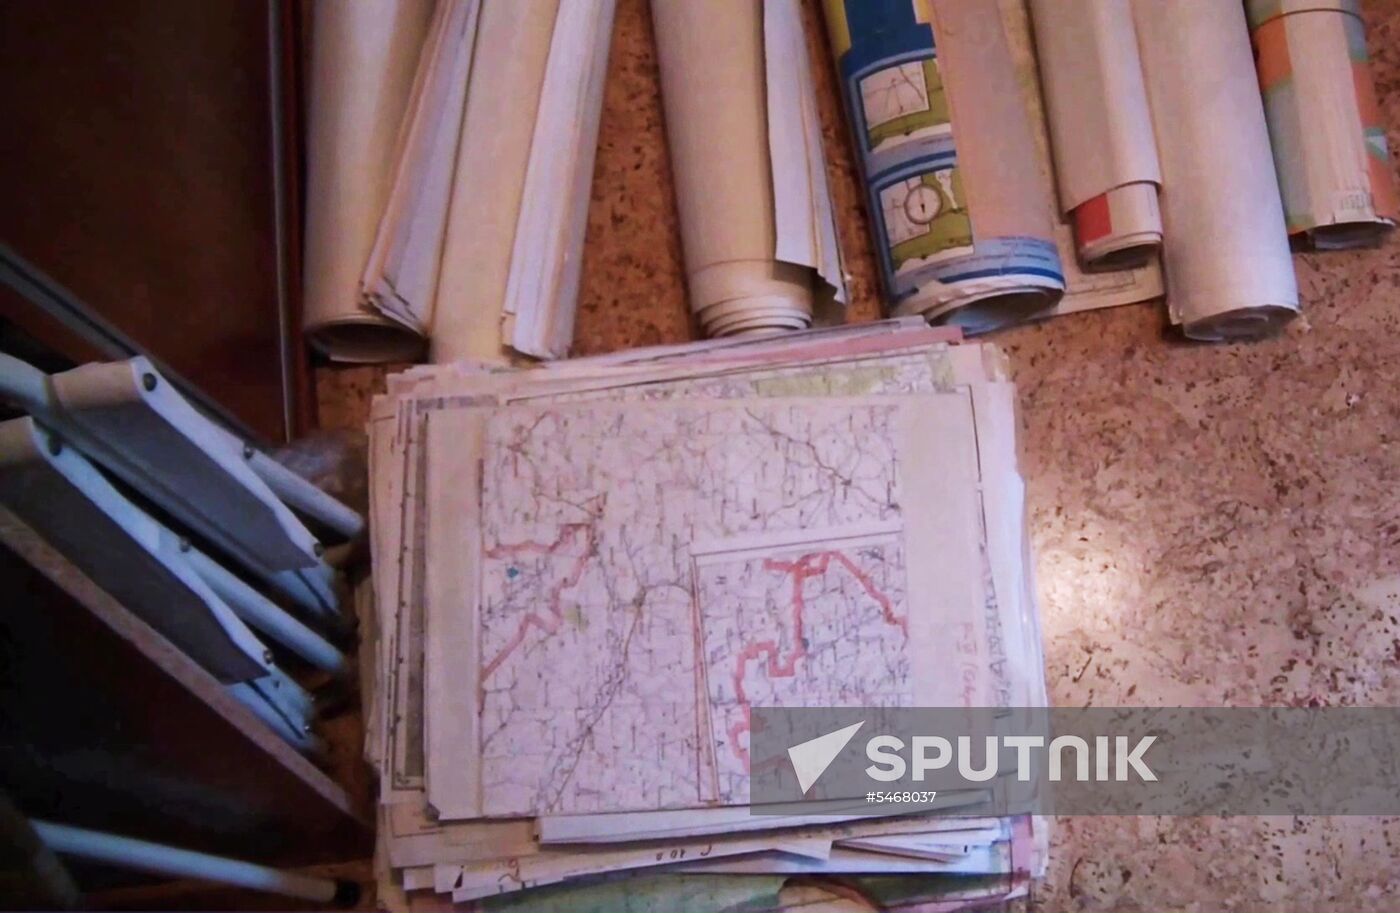 FSB thwarts illegal collection of topographic military materials